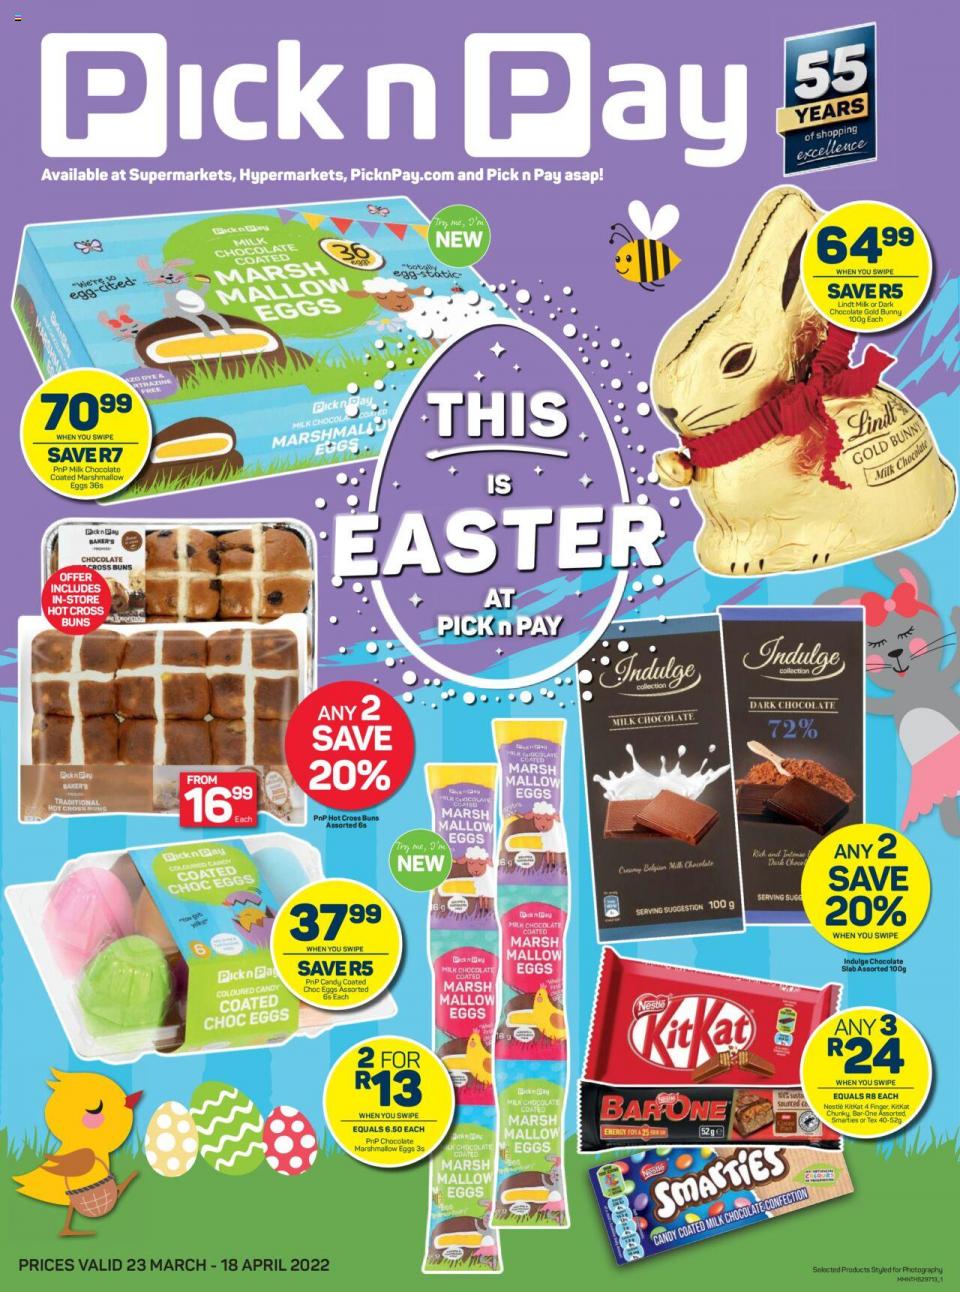 Pick n Pay Specials Easter Sweets and Treats 23 Mar – 18 Apr 2022